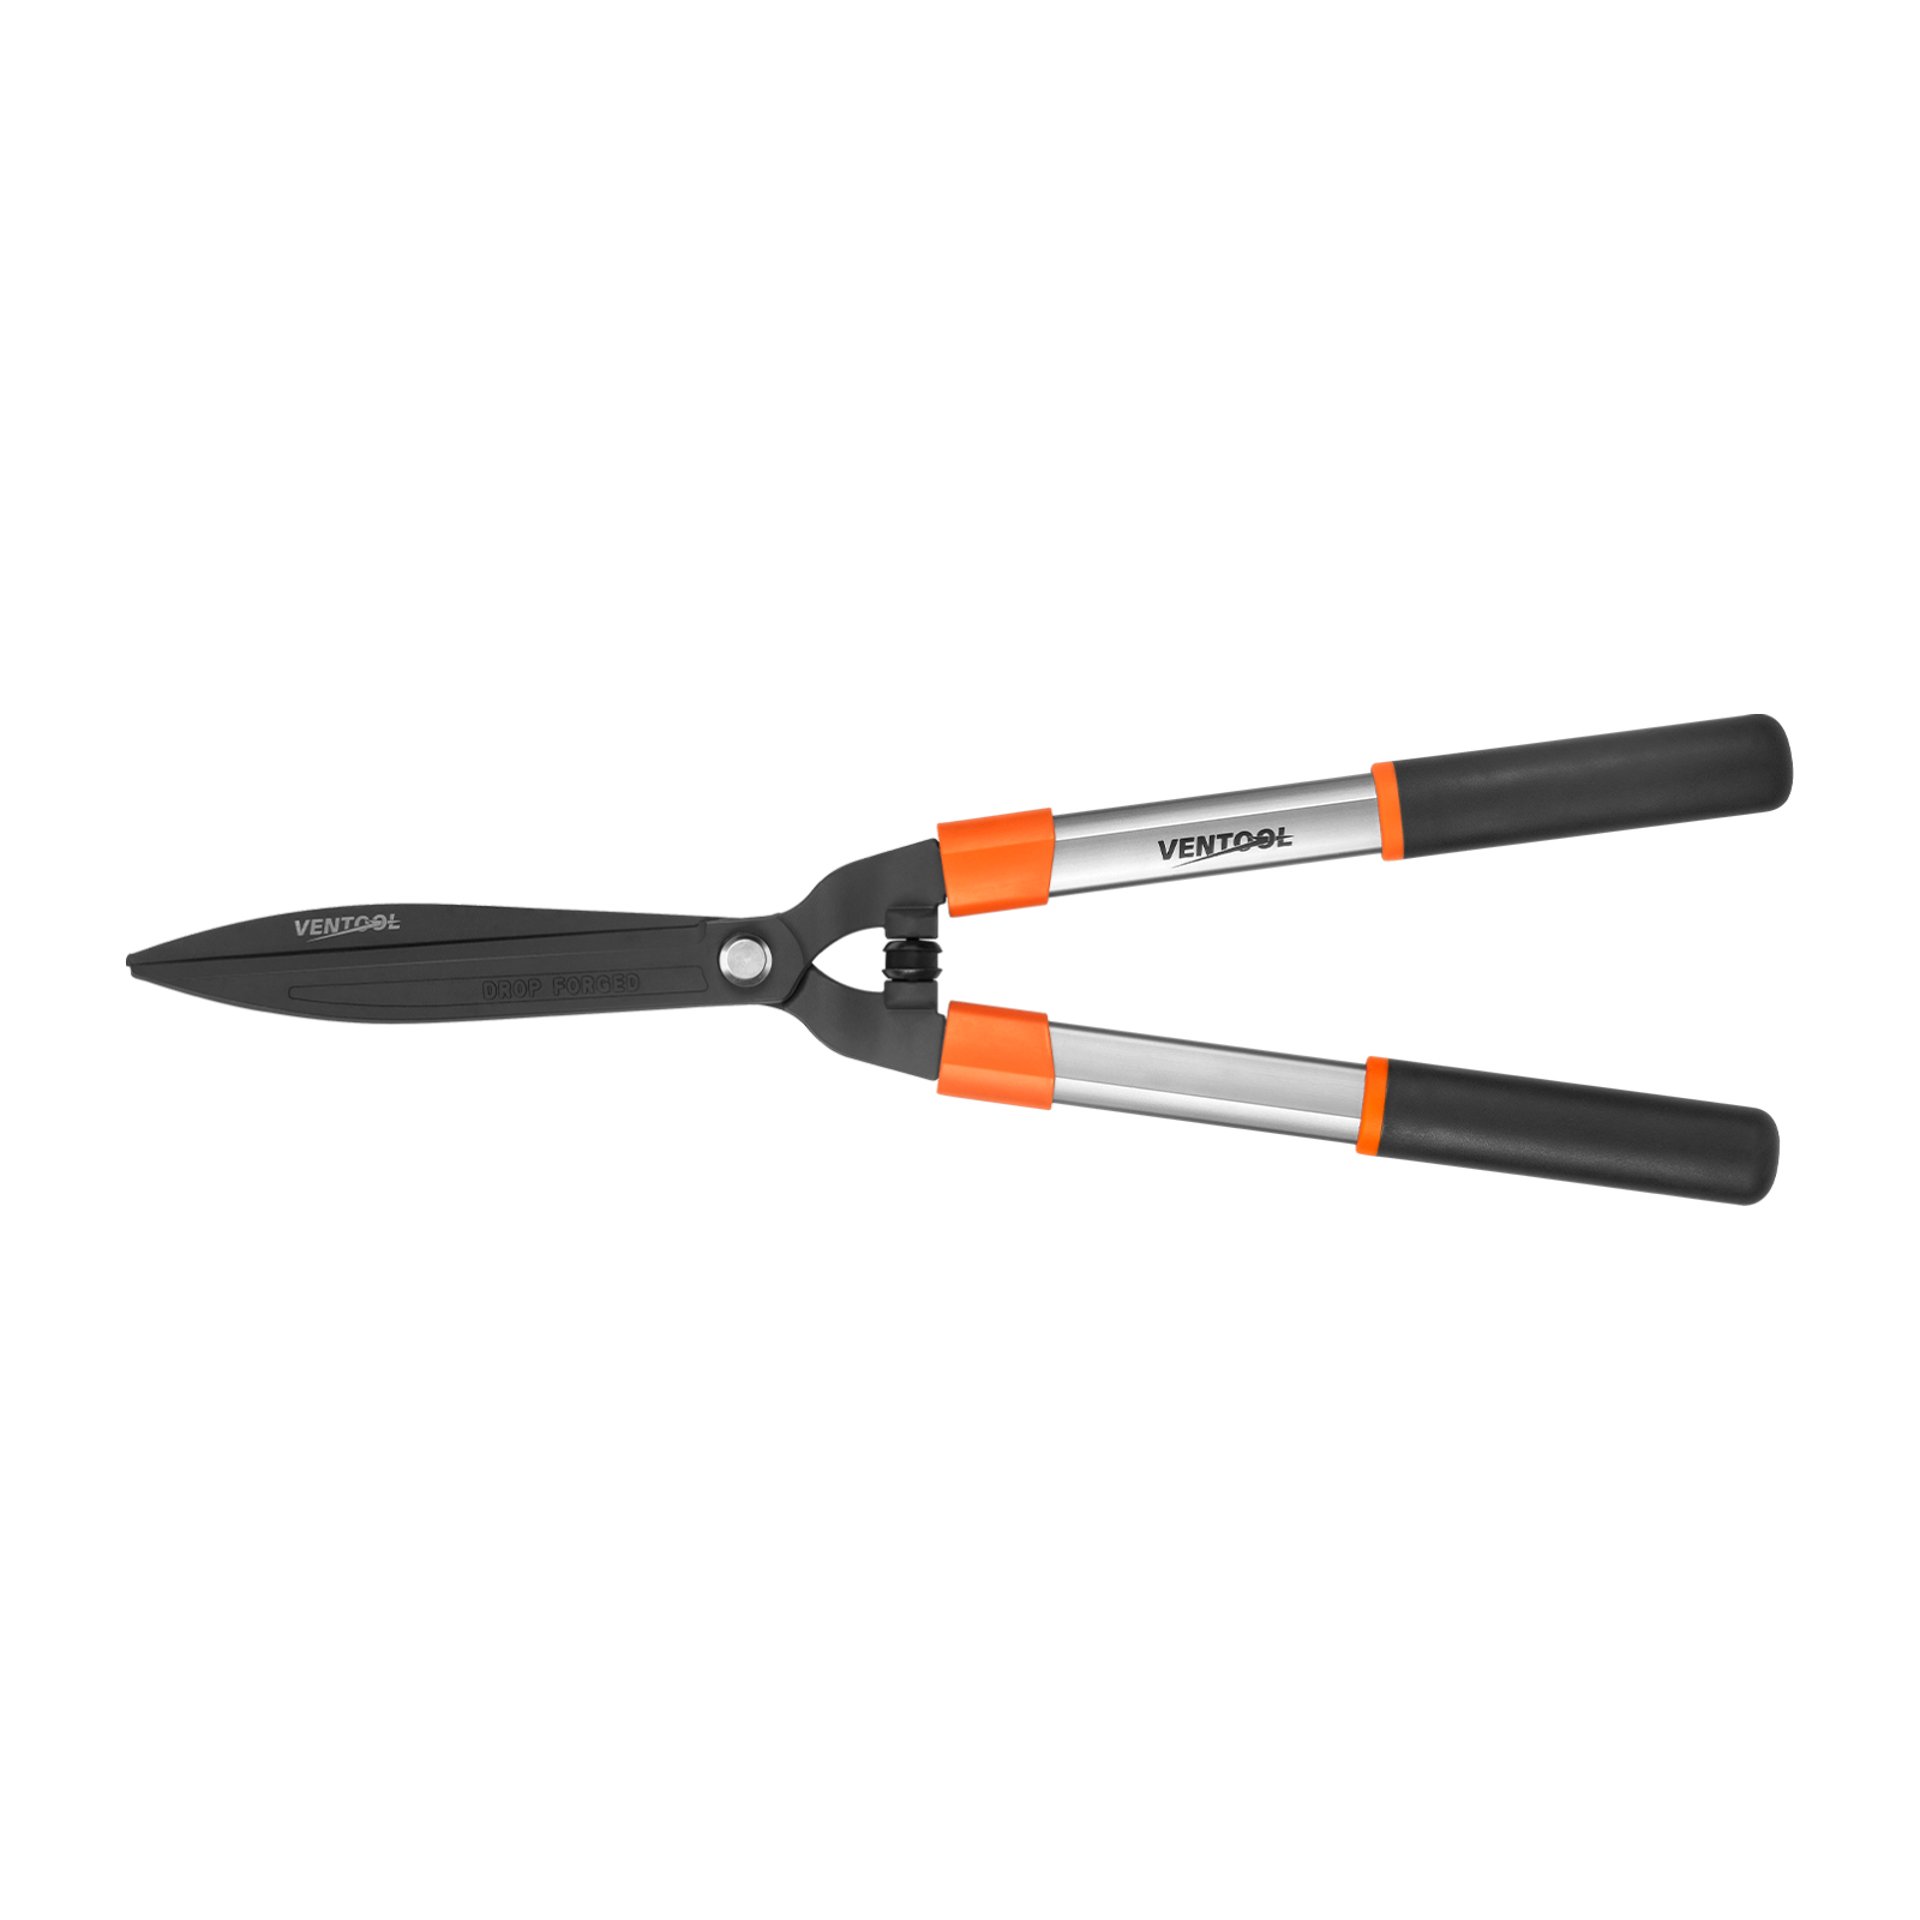 Ventool 24½-Inch Drop Forged Straight Blade Hedge Shears